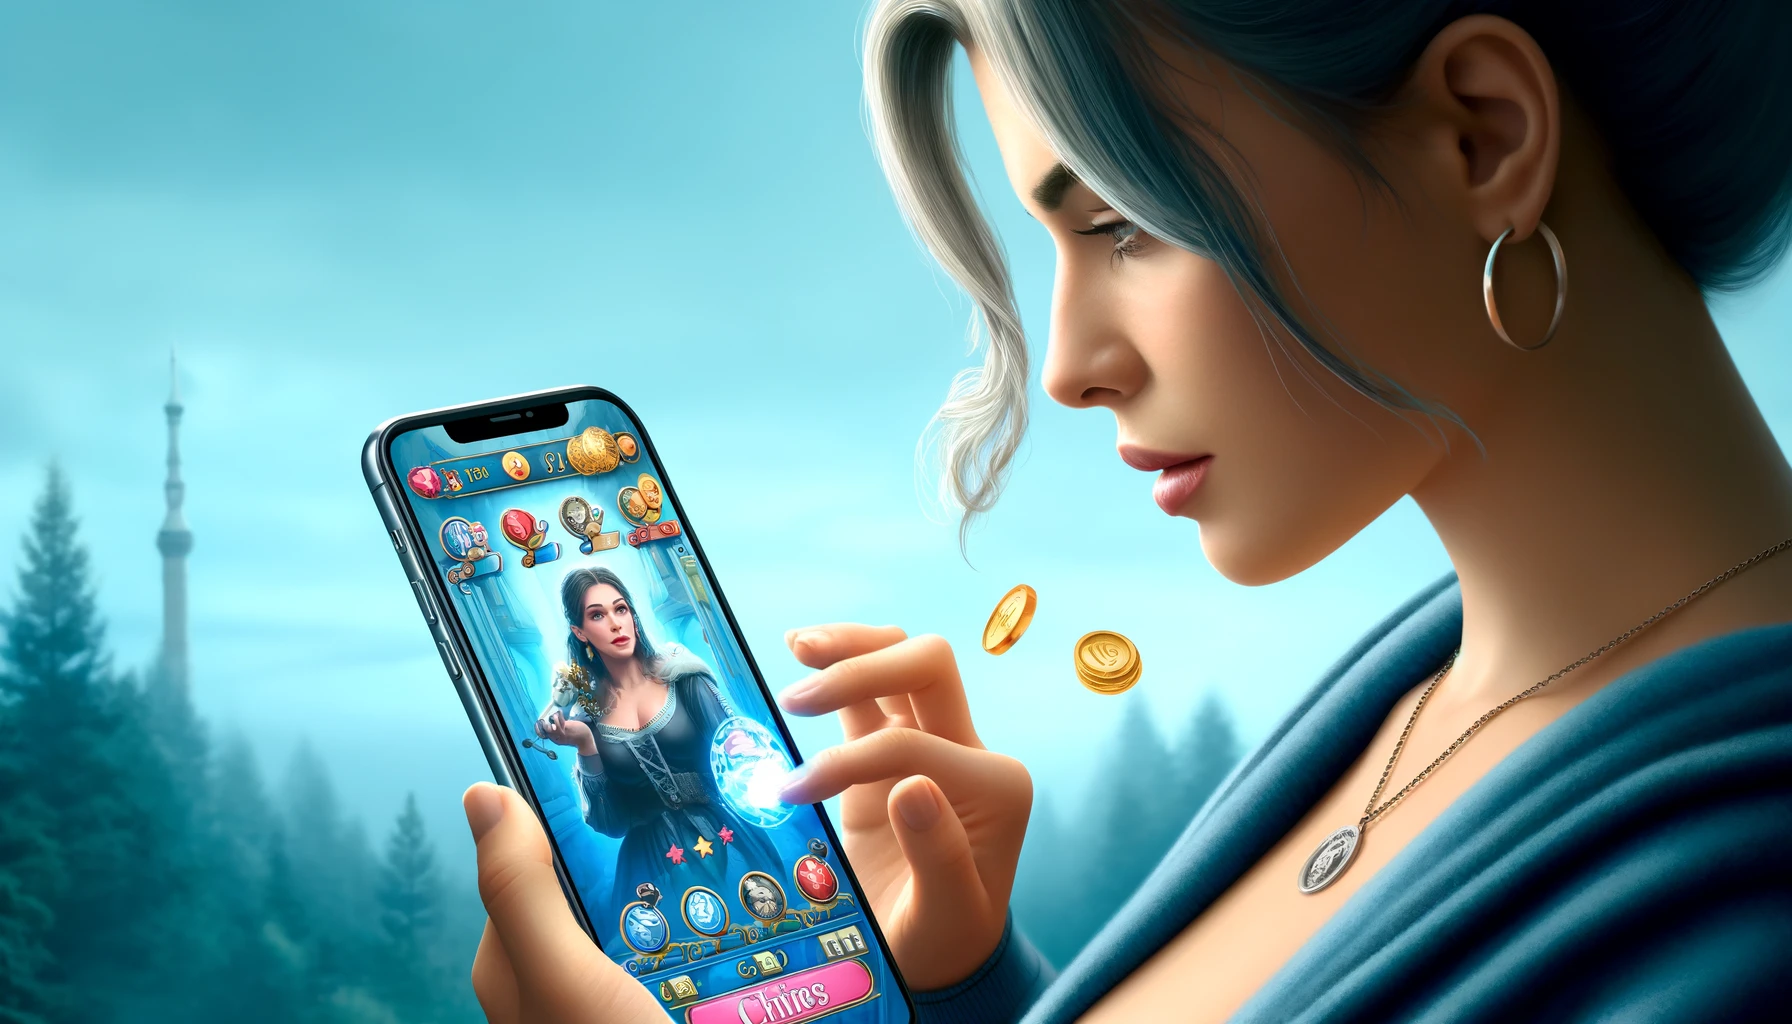 A woman playing a game on her iPhone